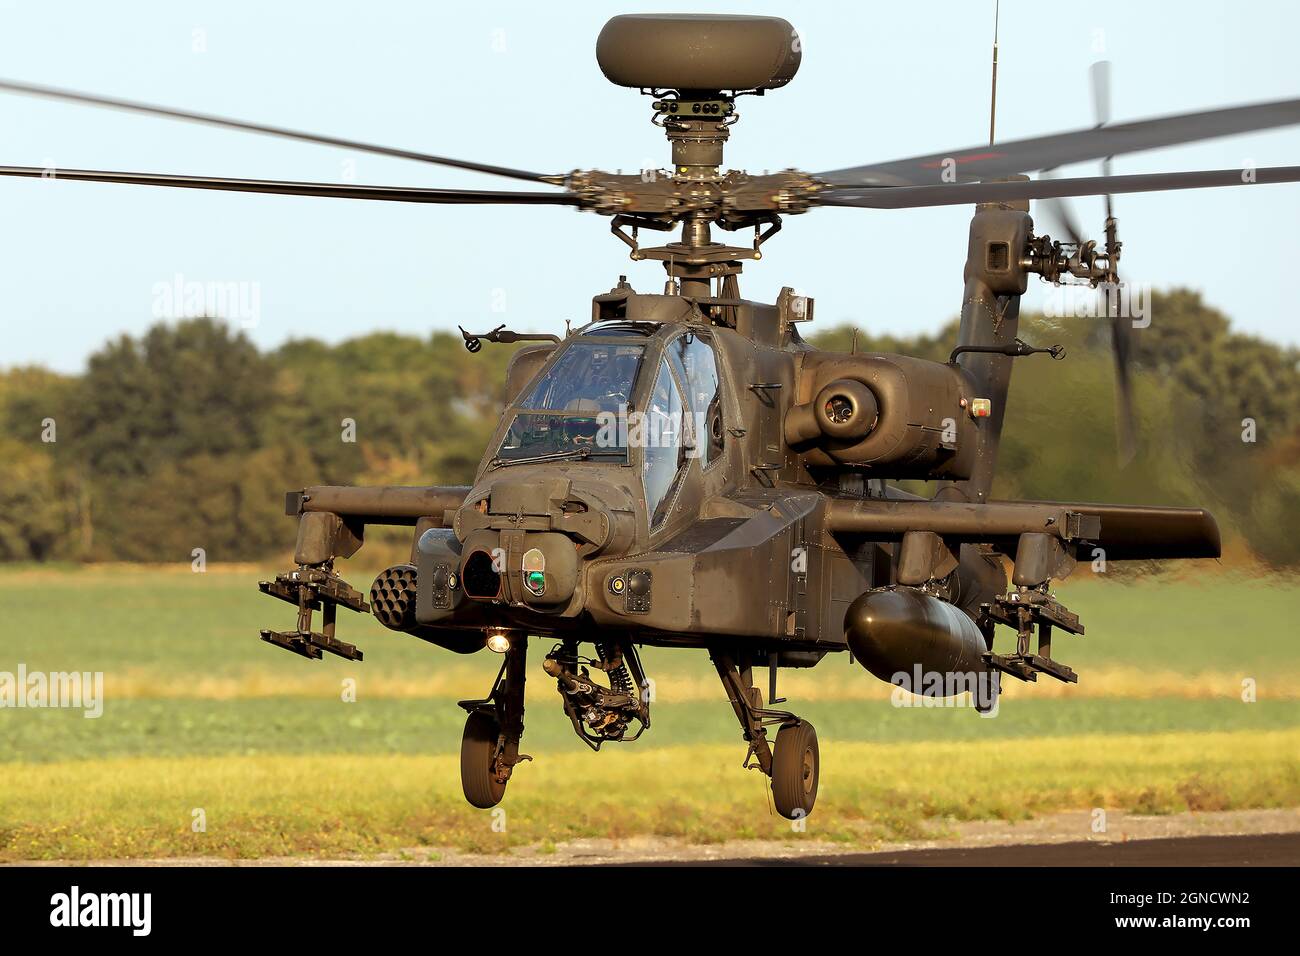 Boeing AH-64D Apache Longbow attack helicopter of the British Army Air Corps - Hulver Airfield, Hulver, UK, News - 22nd September 2021 Stock Photo